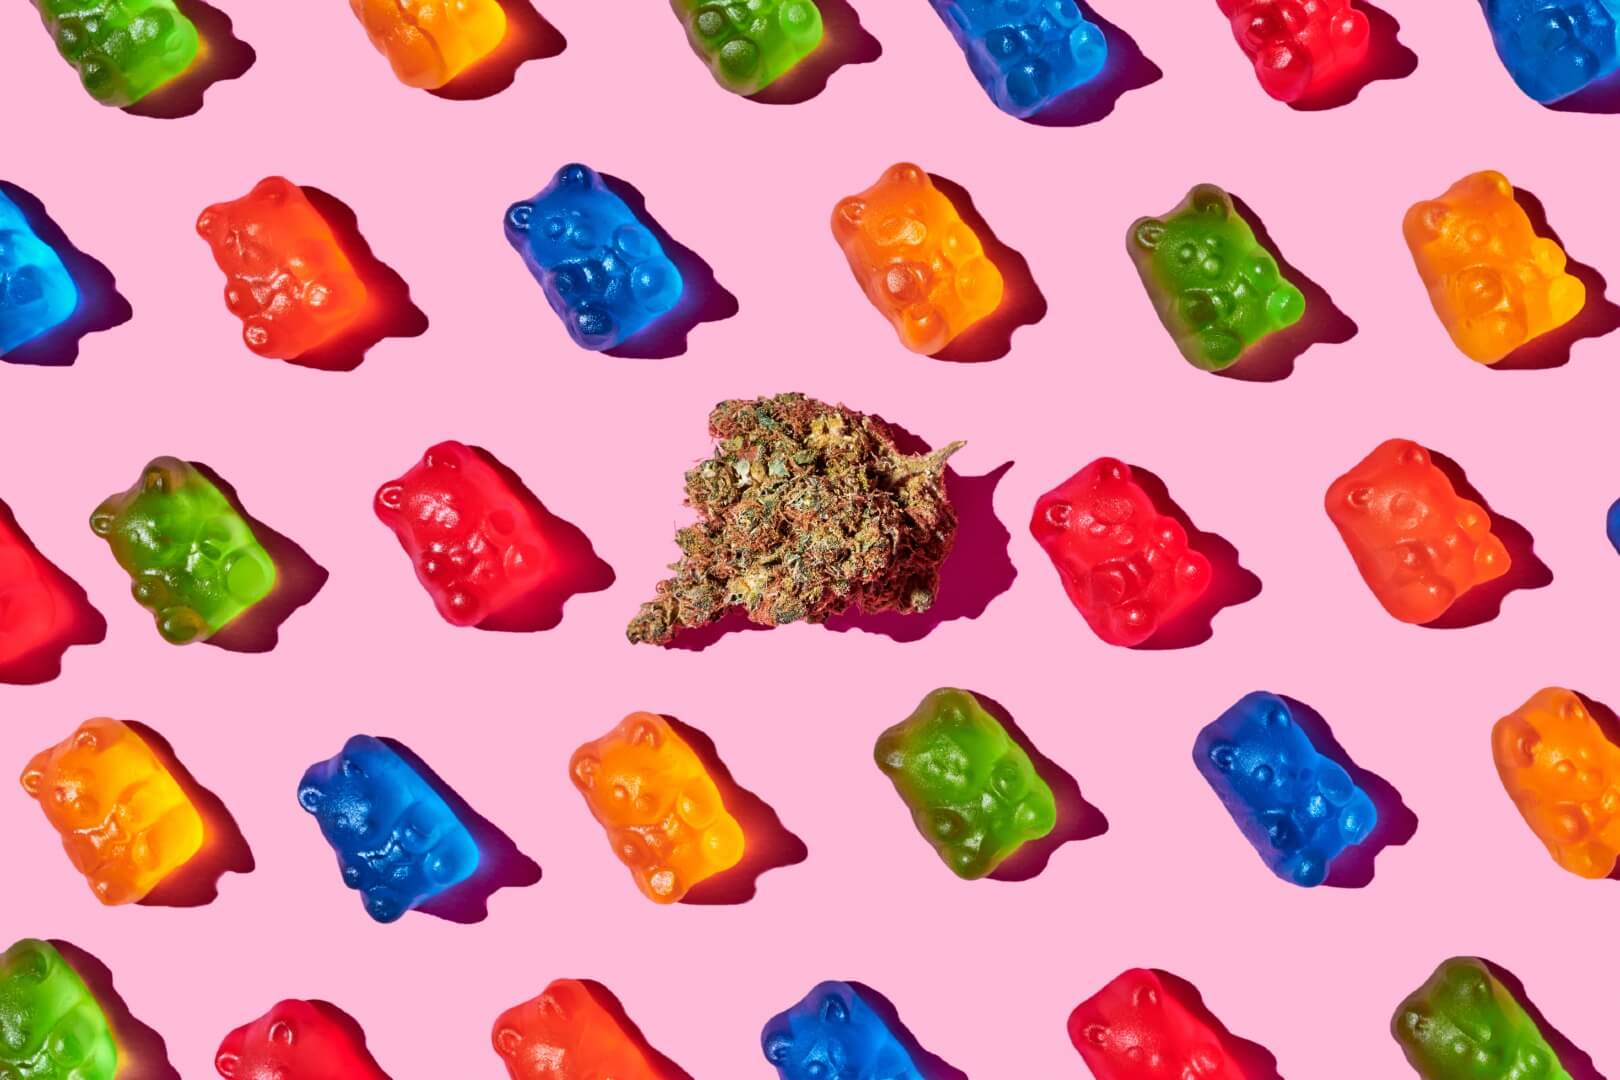 cannabis gummy bears and a nug of weed against a pink background